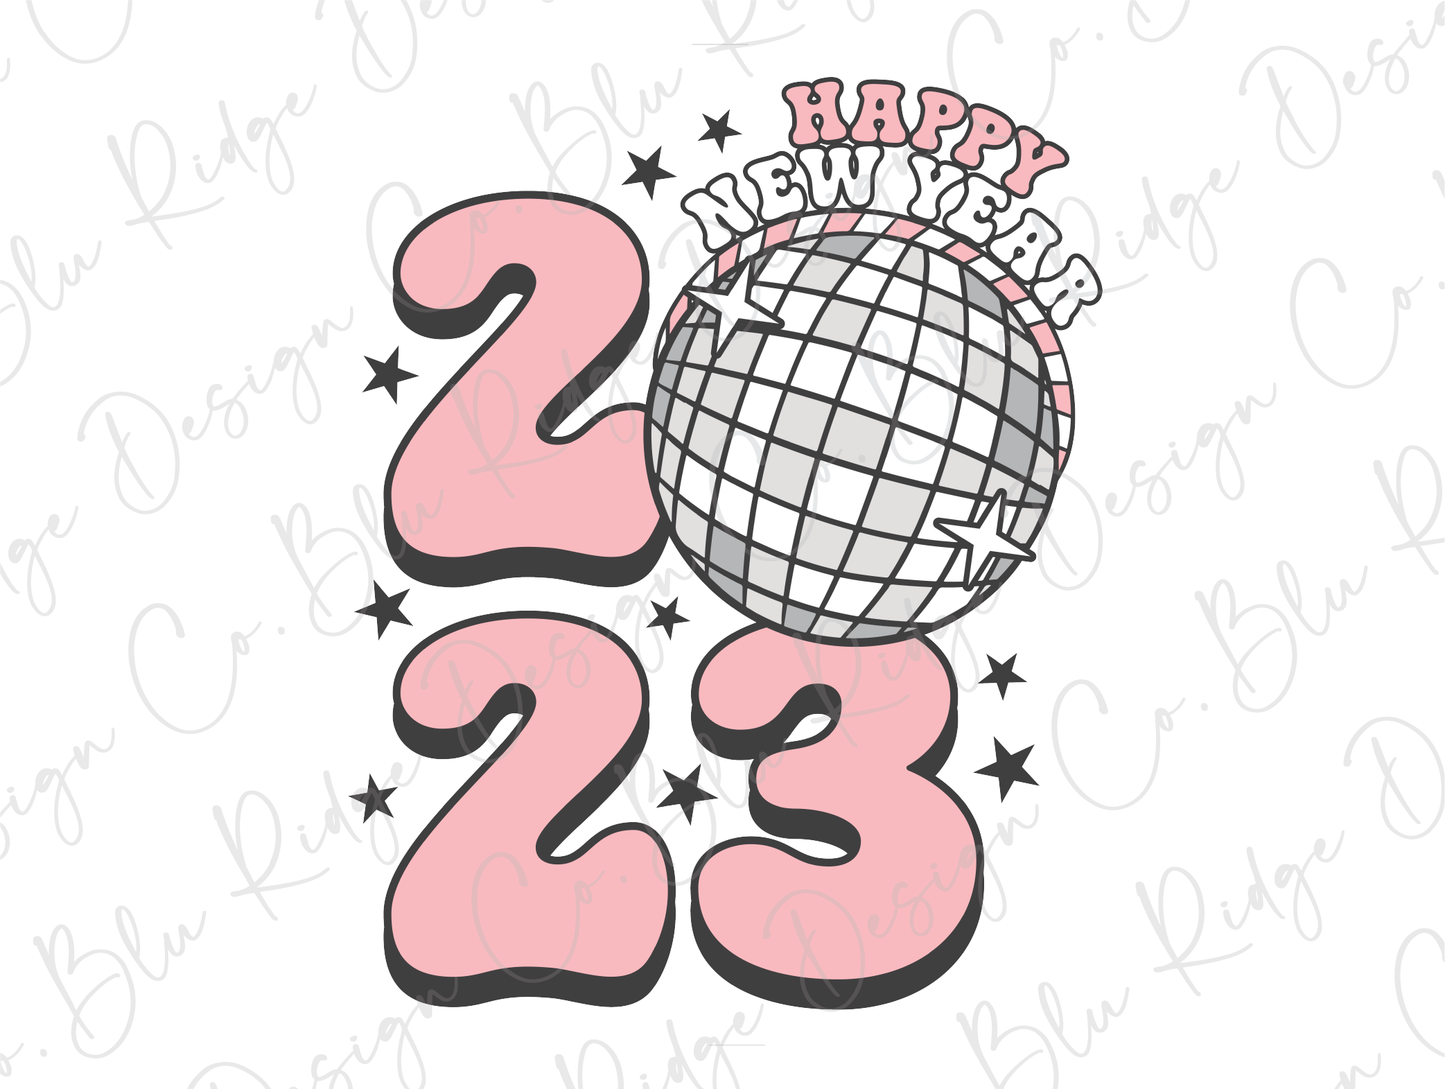 2023 Numbers Happy New Years Party Ball Drop Fireworks Direct to Film (DTF) Transfer